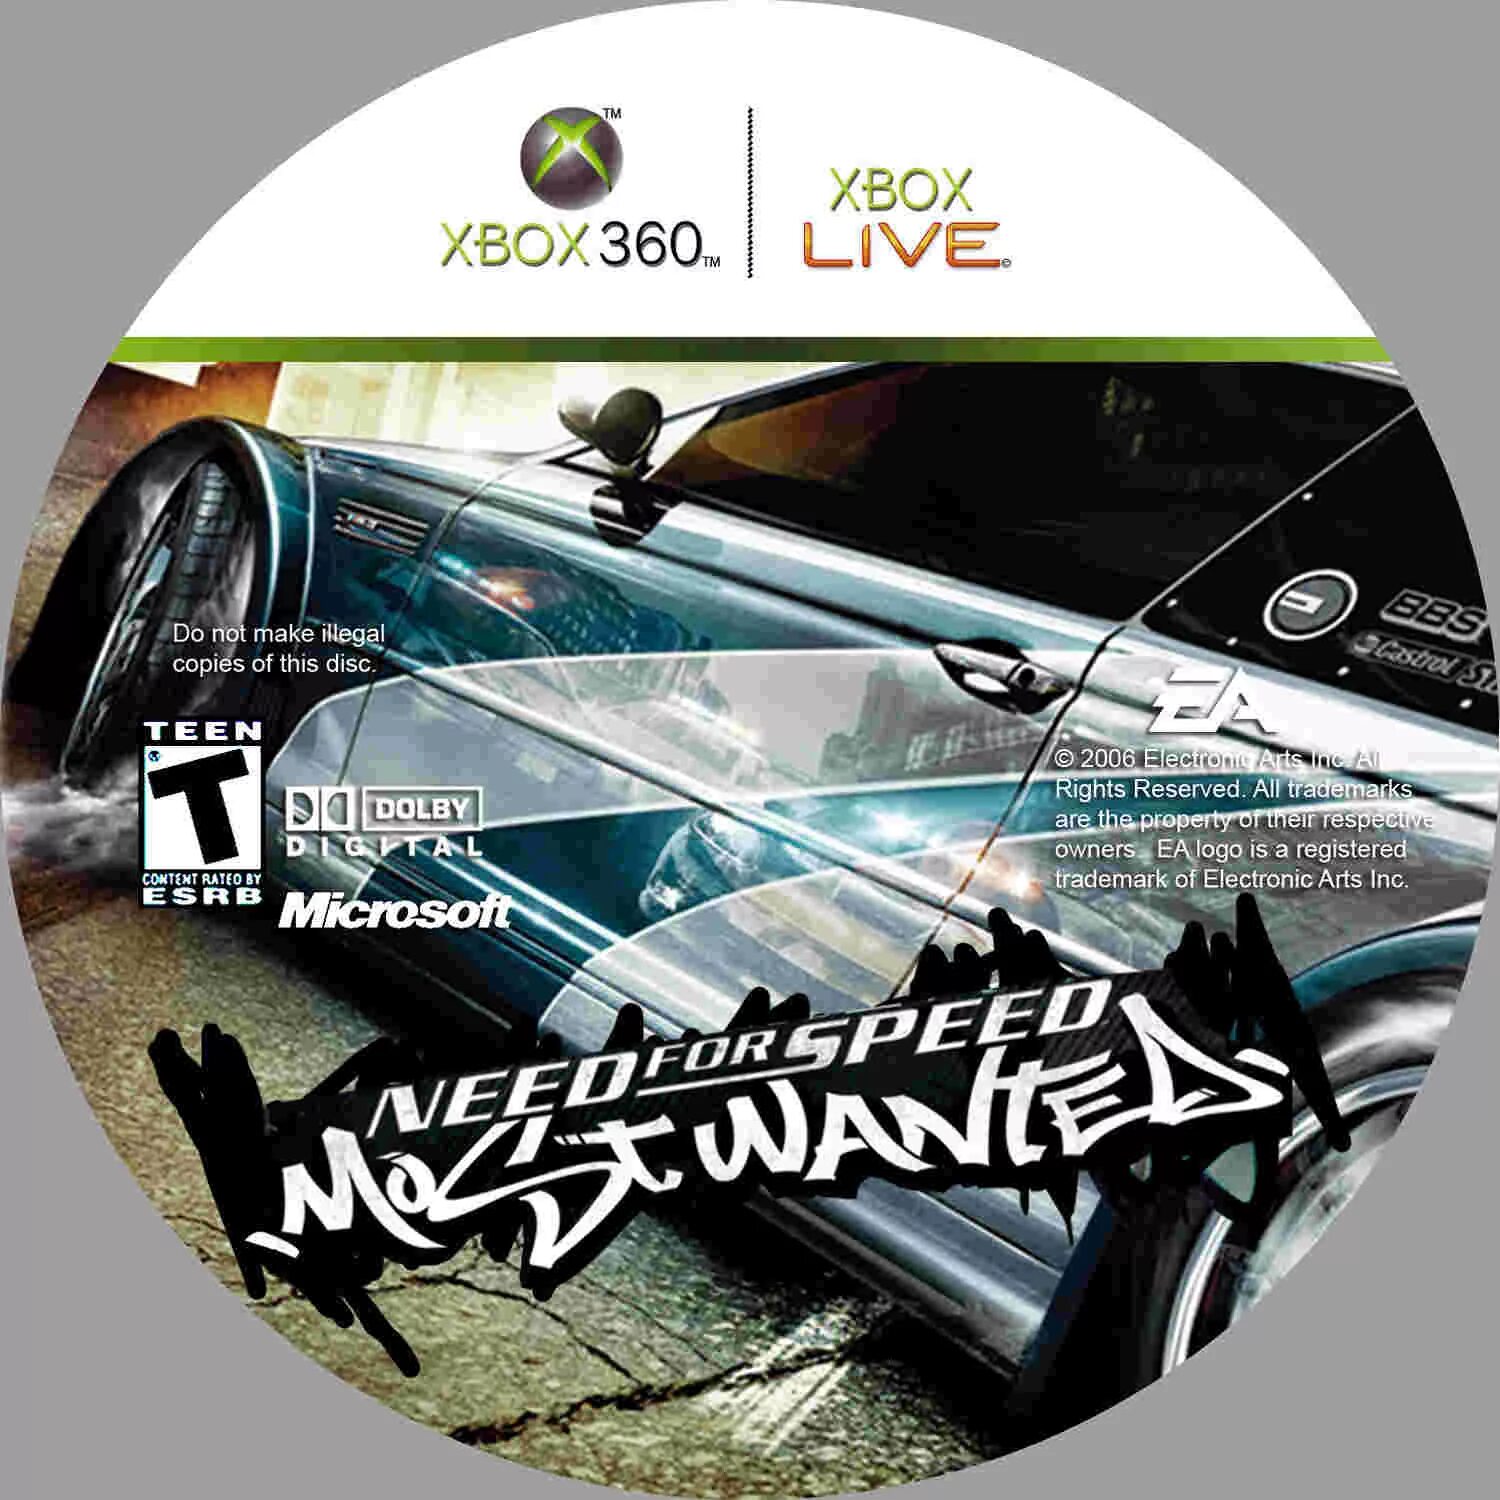 Need for Speed Xbox 360 диск. NFS most wanted диск Xbox 360. NFS most wanted 2005 Xbox 360 русская версия. NFS most wanted 2005 диск. Nfs most wanted xbox